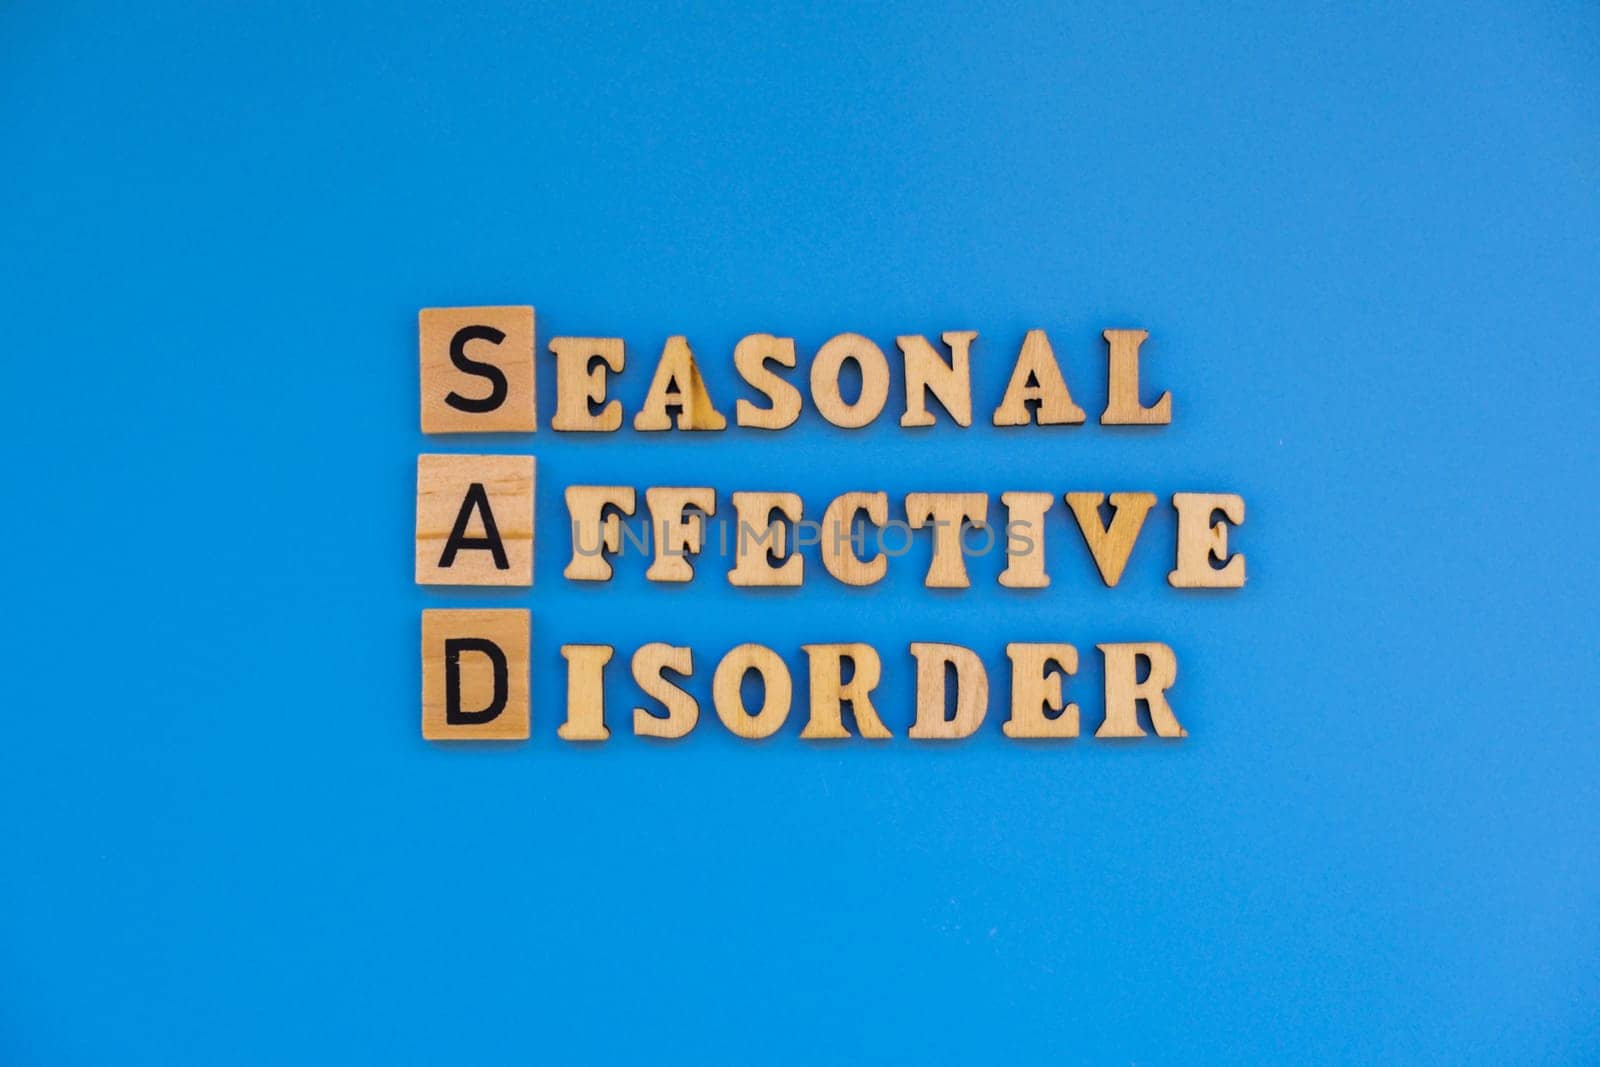 SAD seasonal affective disorder inscription message of mental health illness. Spiritual health problems difficulties pressure. Loneliness need vitamin C exhausted. Imbalance low energy